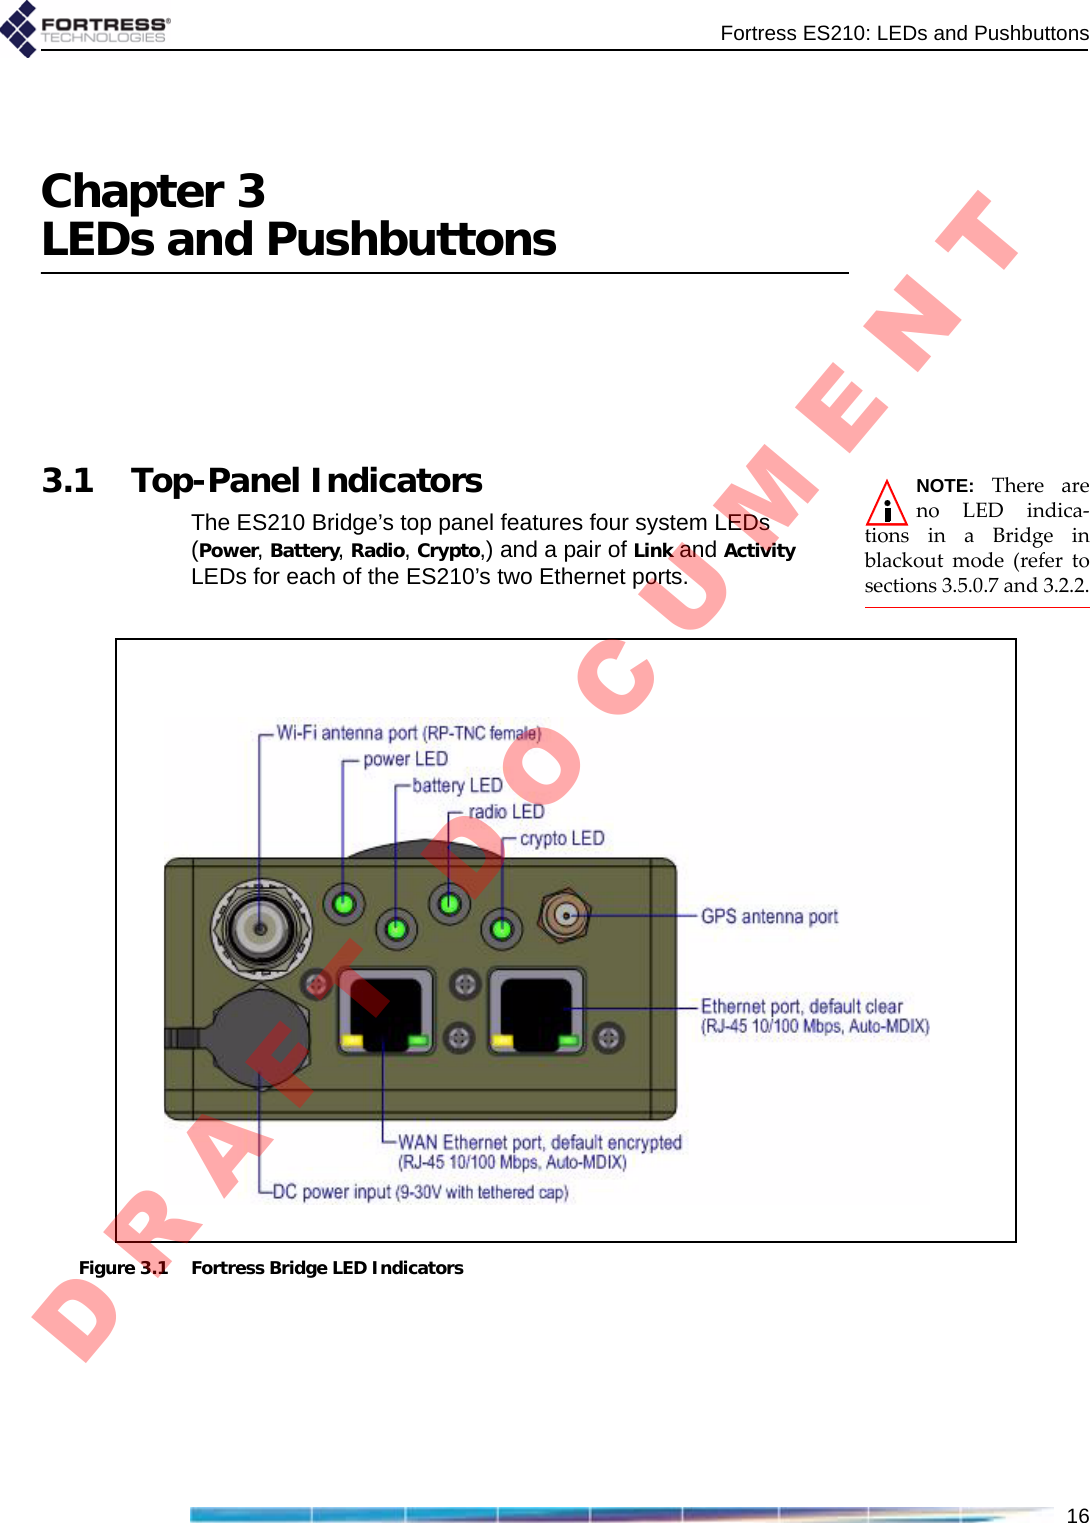 Fortress ES210: LEDs and Pushbuttons16Chapter 3LEDs and PushbuttonsNOTE:TherearenoLEDindica‐tionsinaBridgeinblackoutmode(refertosections3.5.0.7and3.2.2.3.1 Top-Panel IndicatorsThe ES210 Bridge’s top panel features four system LEDs (Power, Battery, Radio, Crypto,) and a pair of Link and Activity LEDs for each of the ES210’s two Ethernet ports.Figure 3.1 Fortress Bridge LED IndicatorsD R A F T   D O C U M E N T